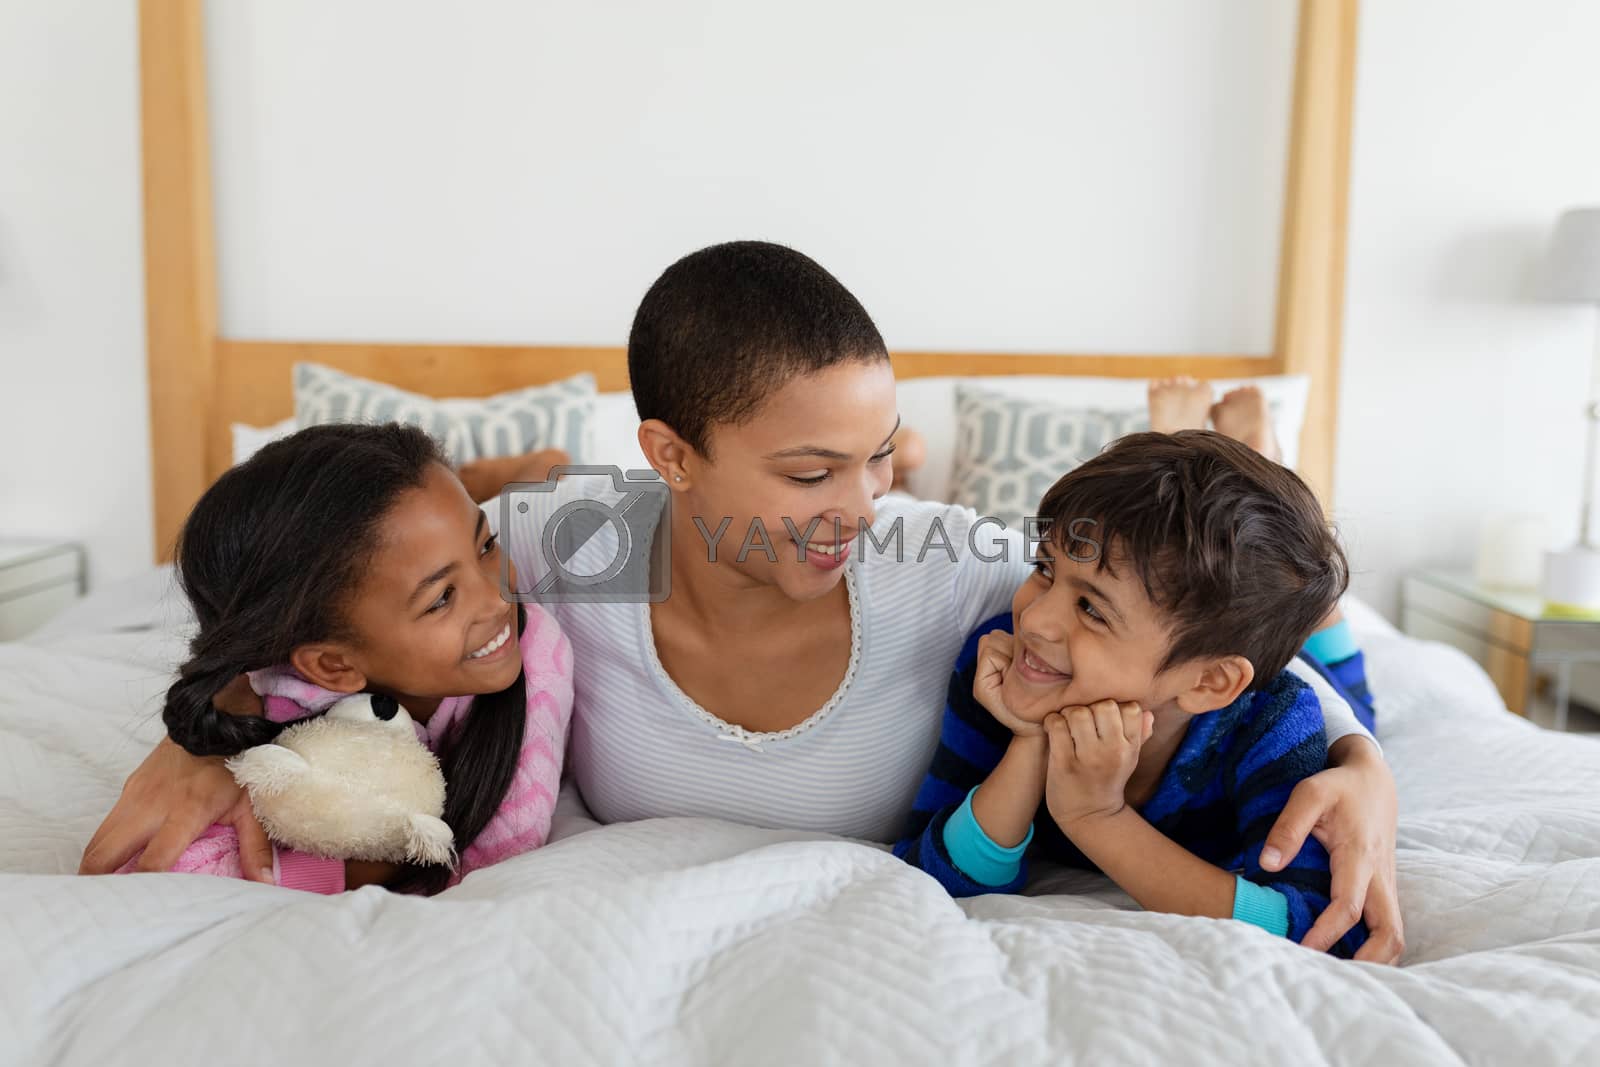 Royalty free image of Mother and children relaxing together on bed in bedroom by Wavebreakmedia